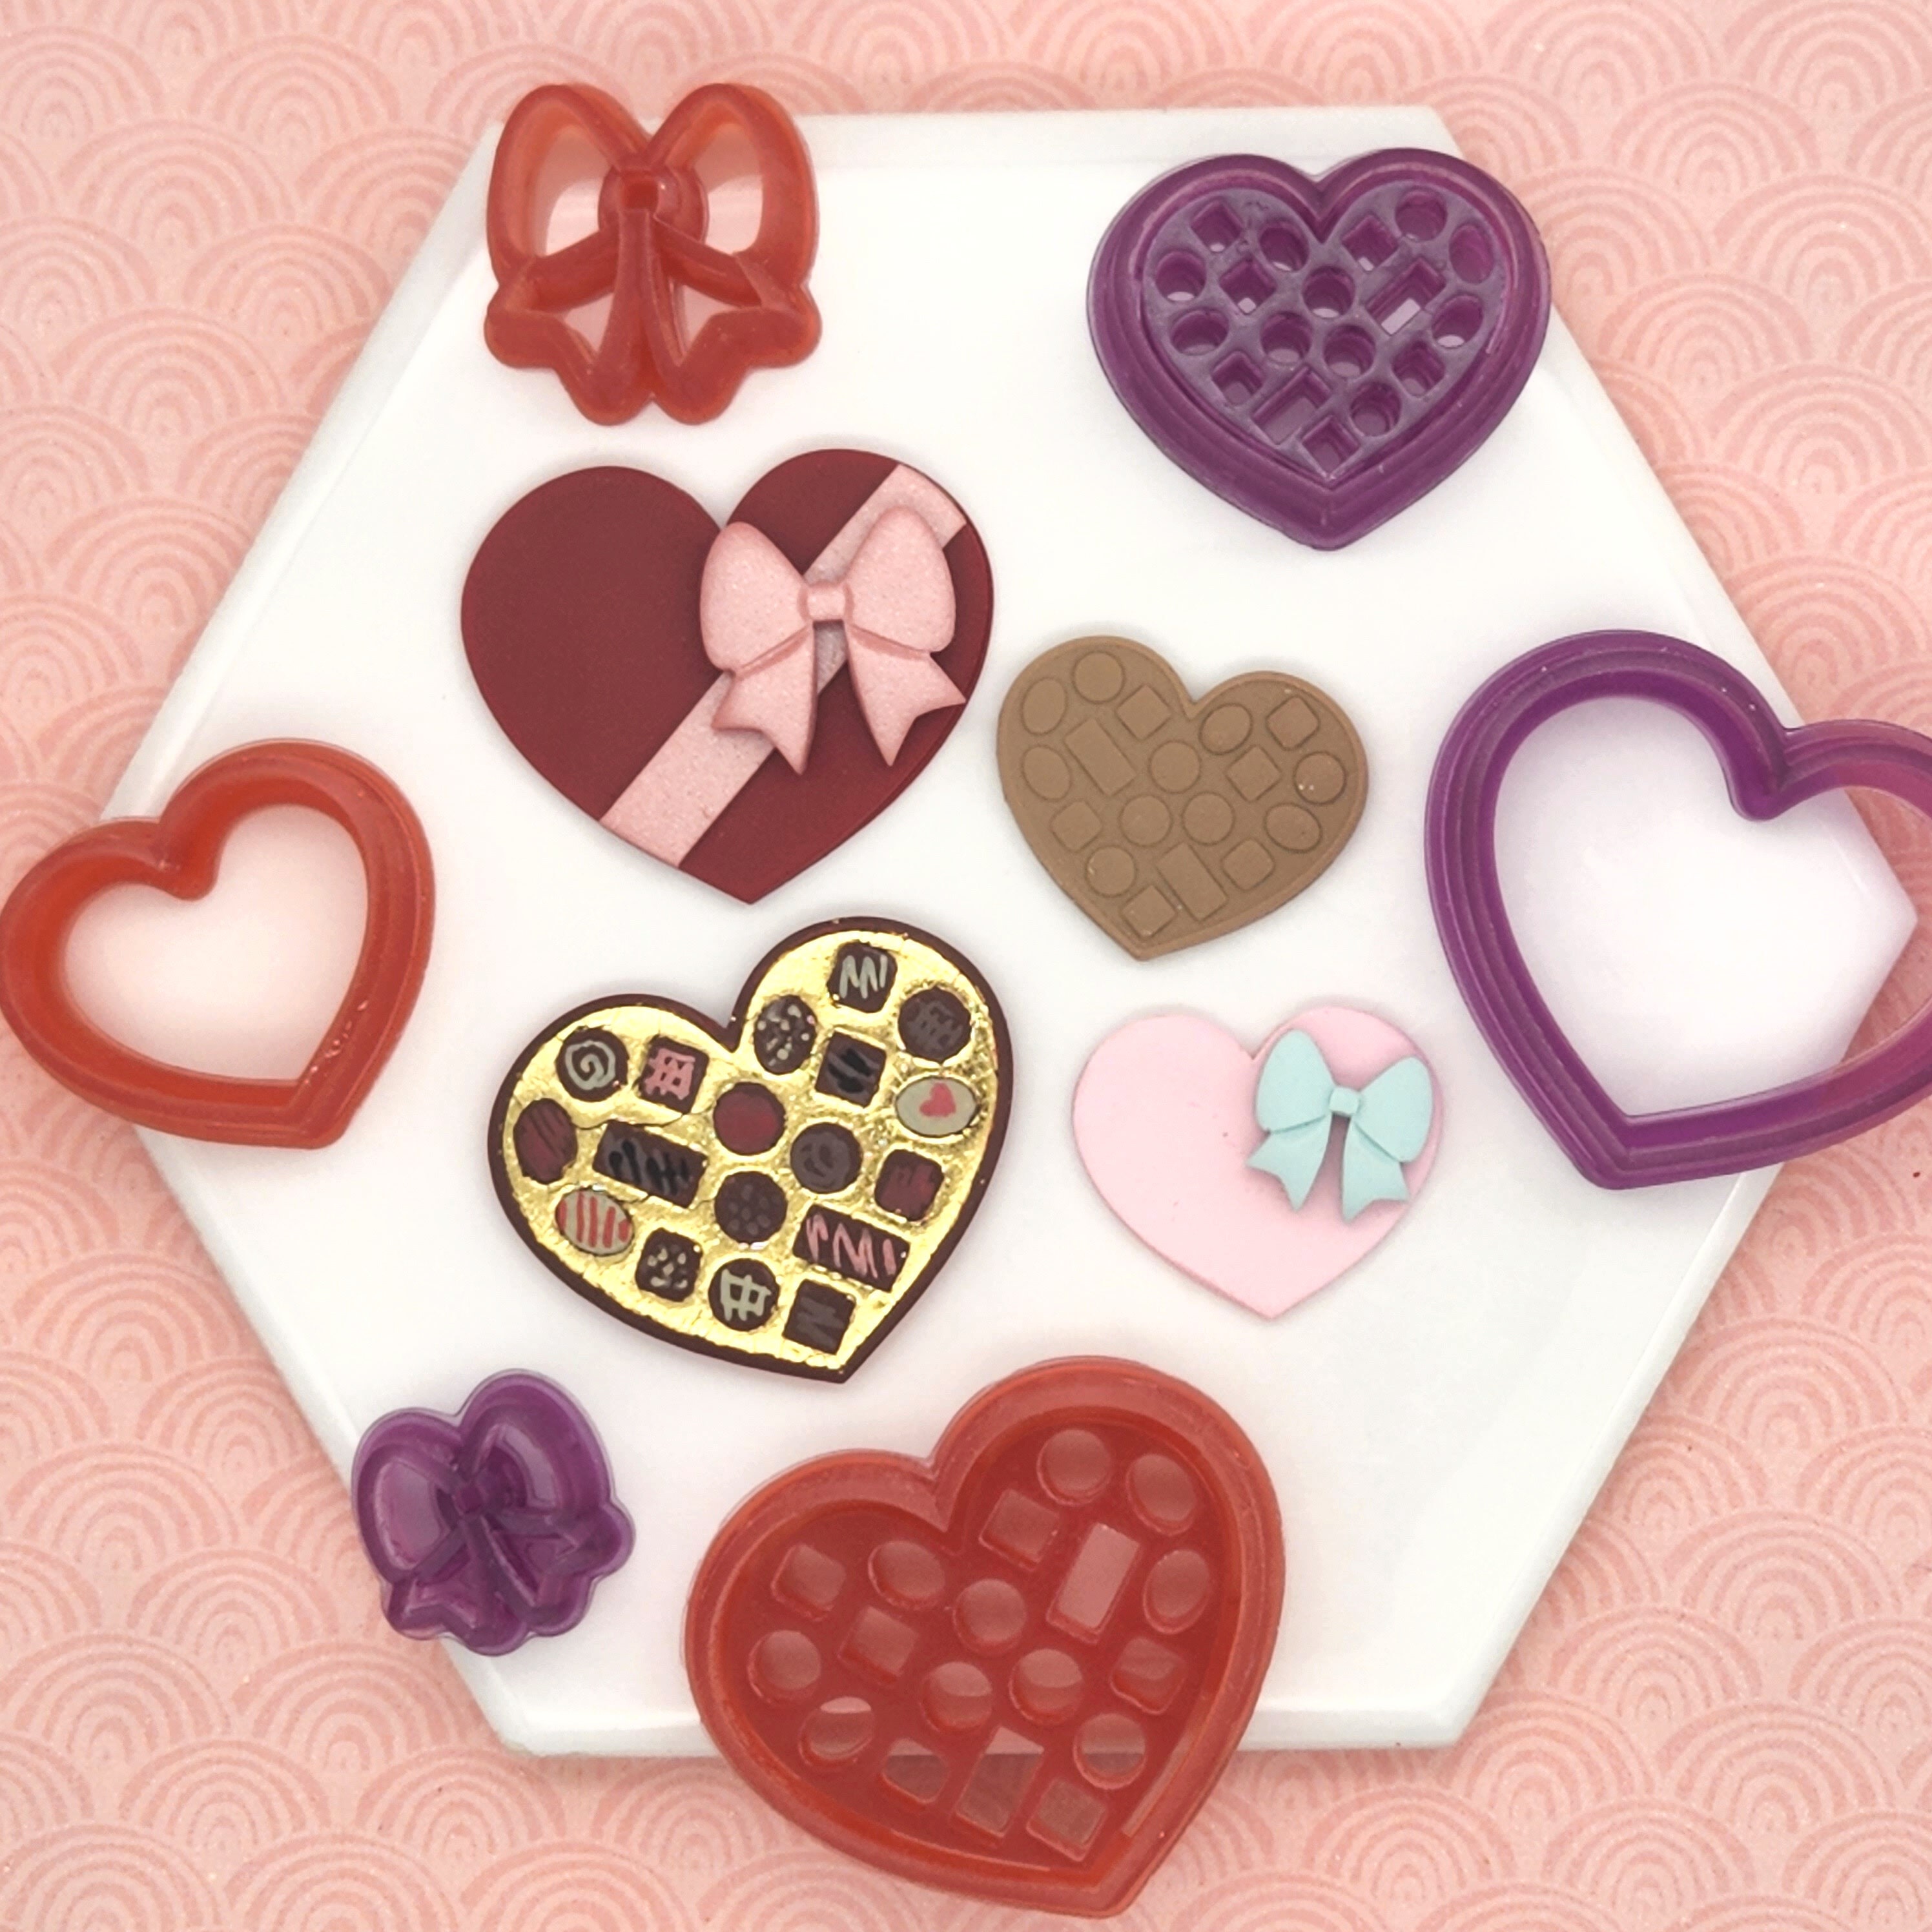 Heart Shaped Soft Polymer Clay Cutters Wedding Party Favors